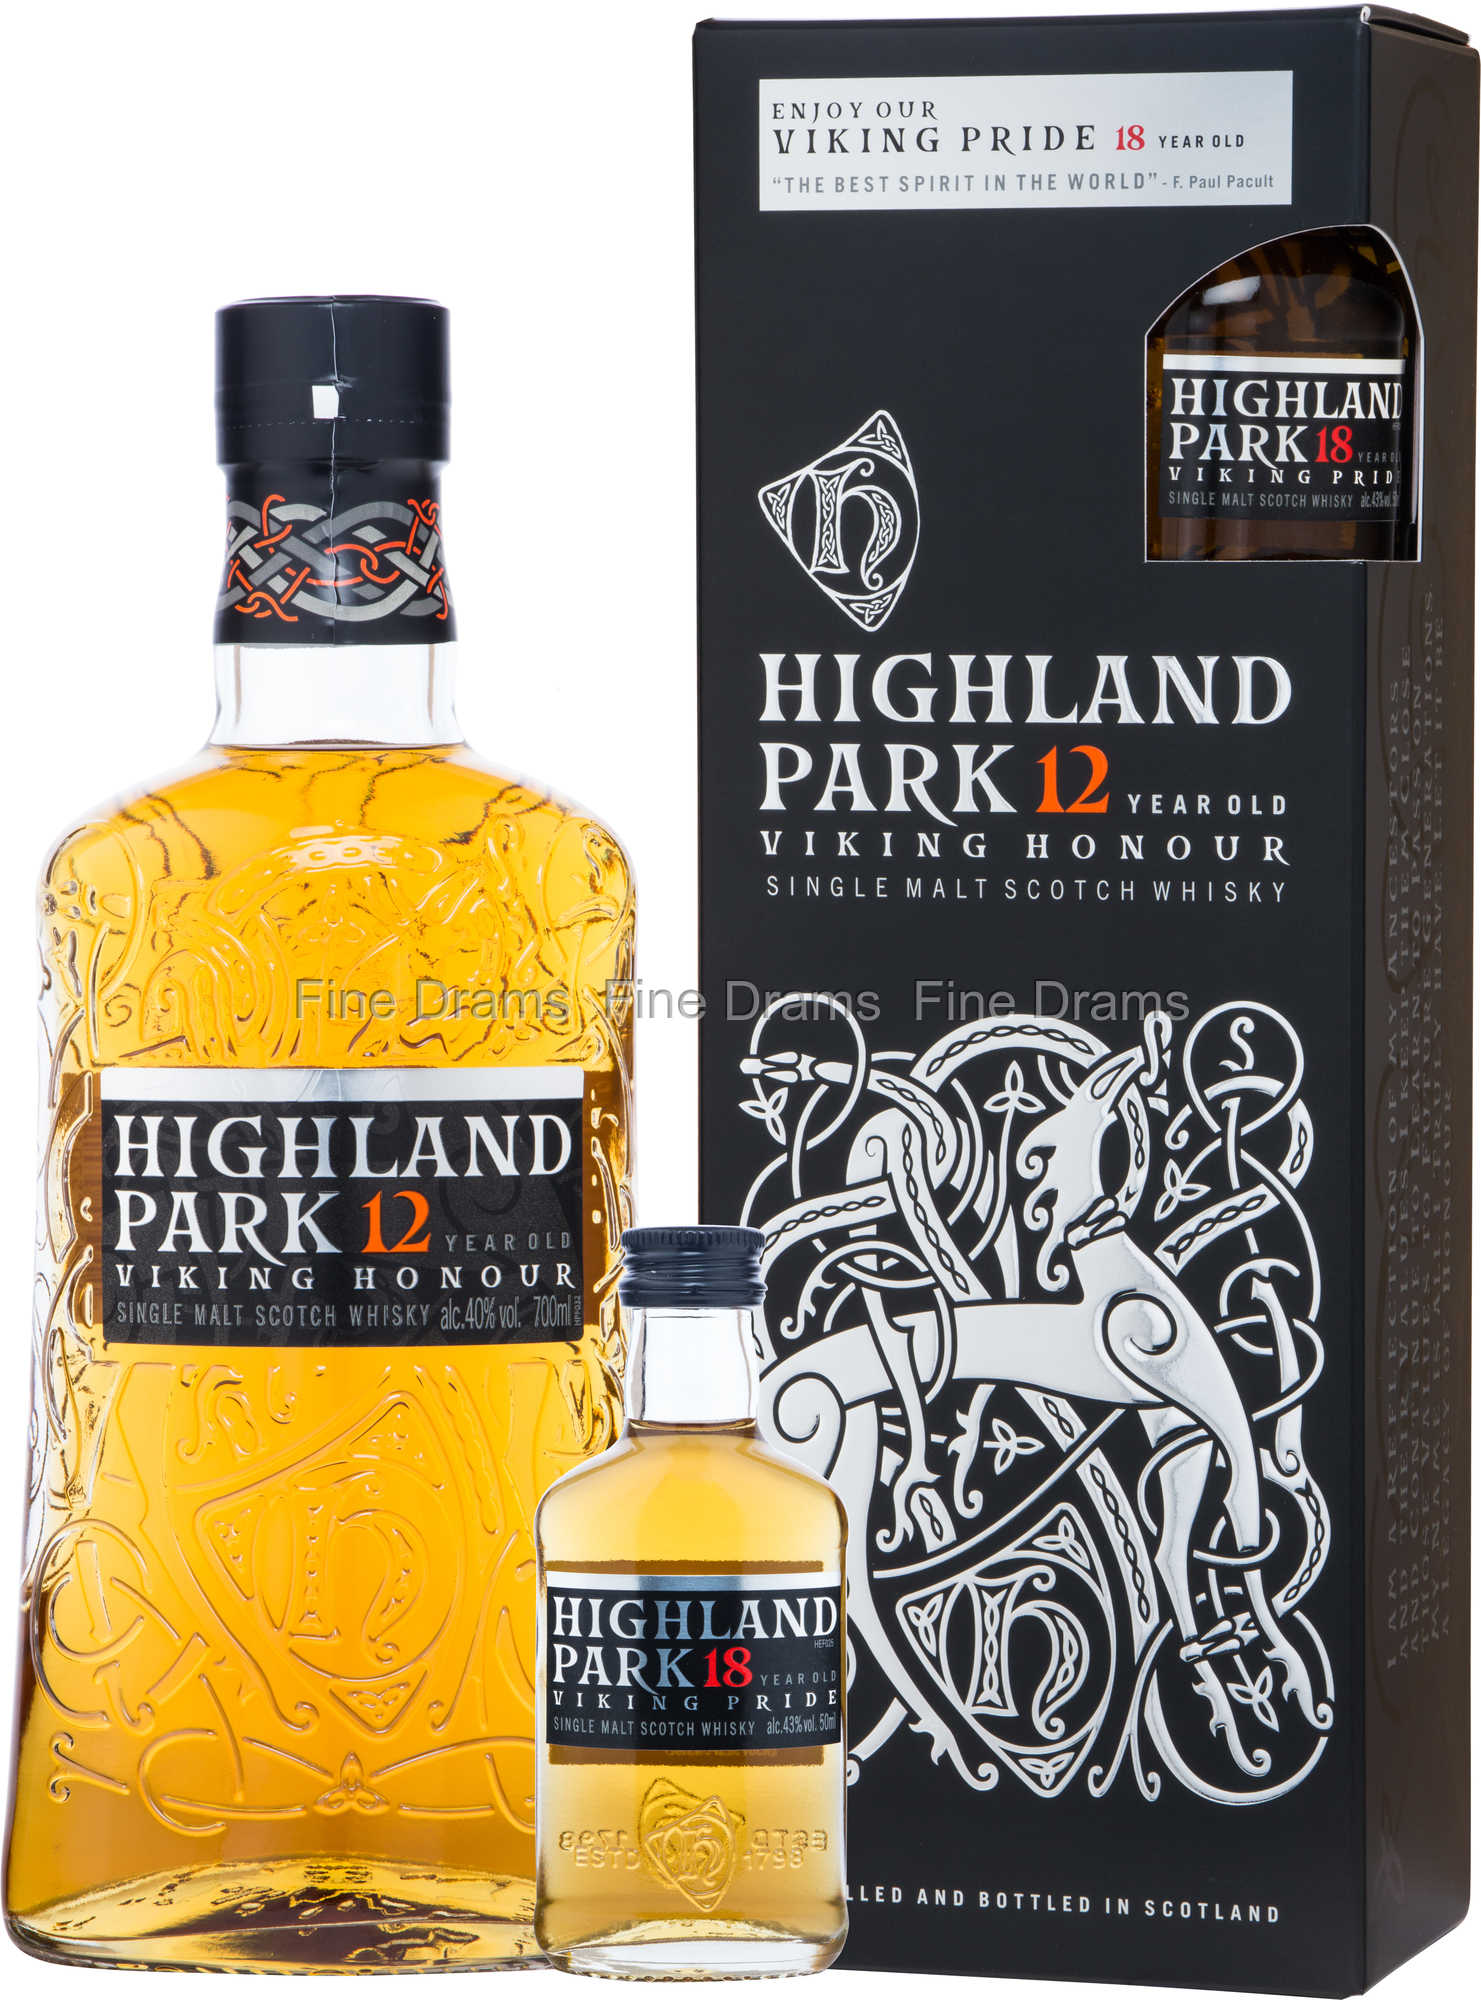 https://images.finedrams.com/image/33615-large-1512777172/highland-park-12-year-old-whisky-viking-honour-with-18-year-old-viking-pride-miniature.jpg